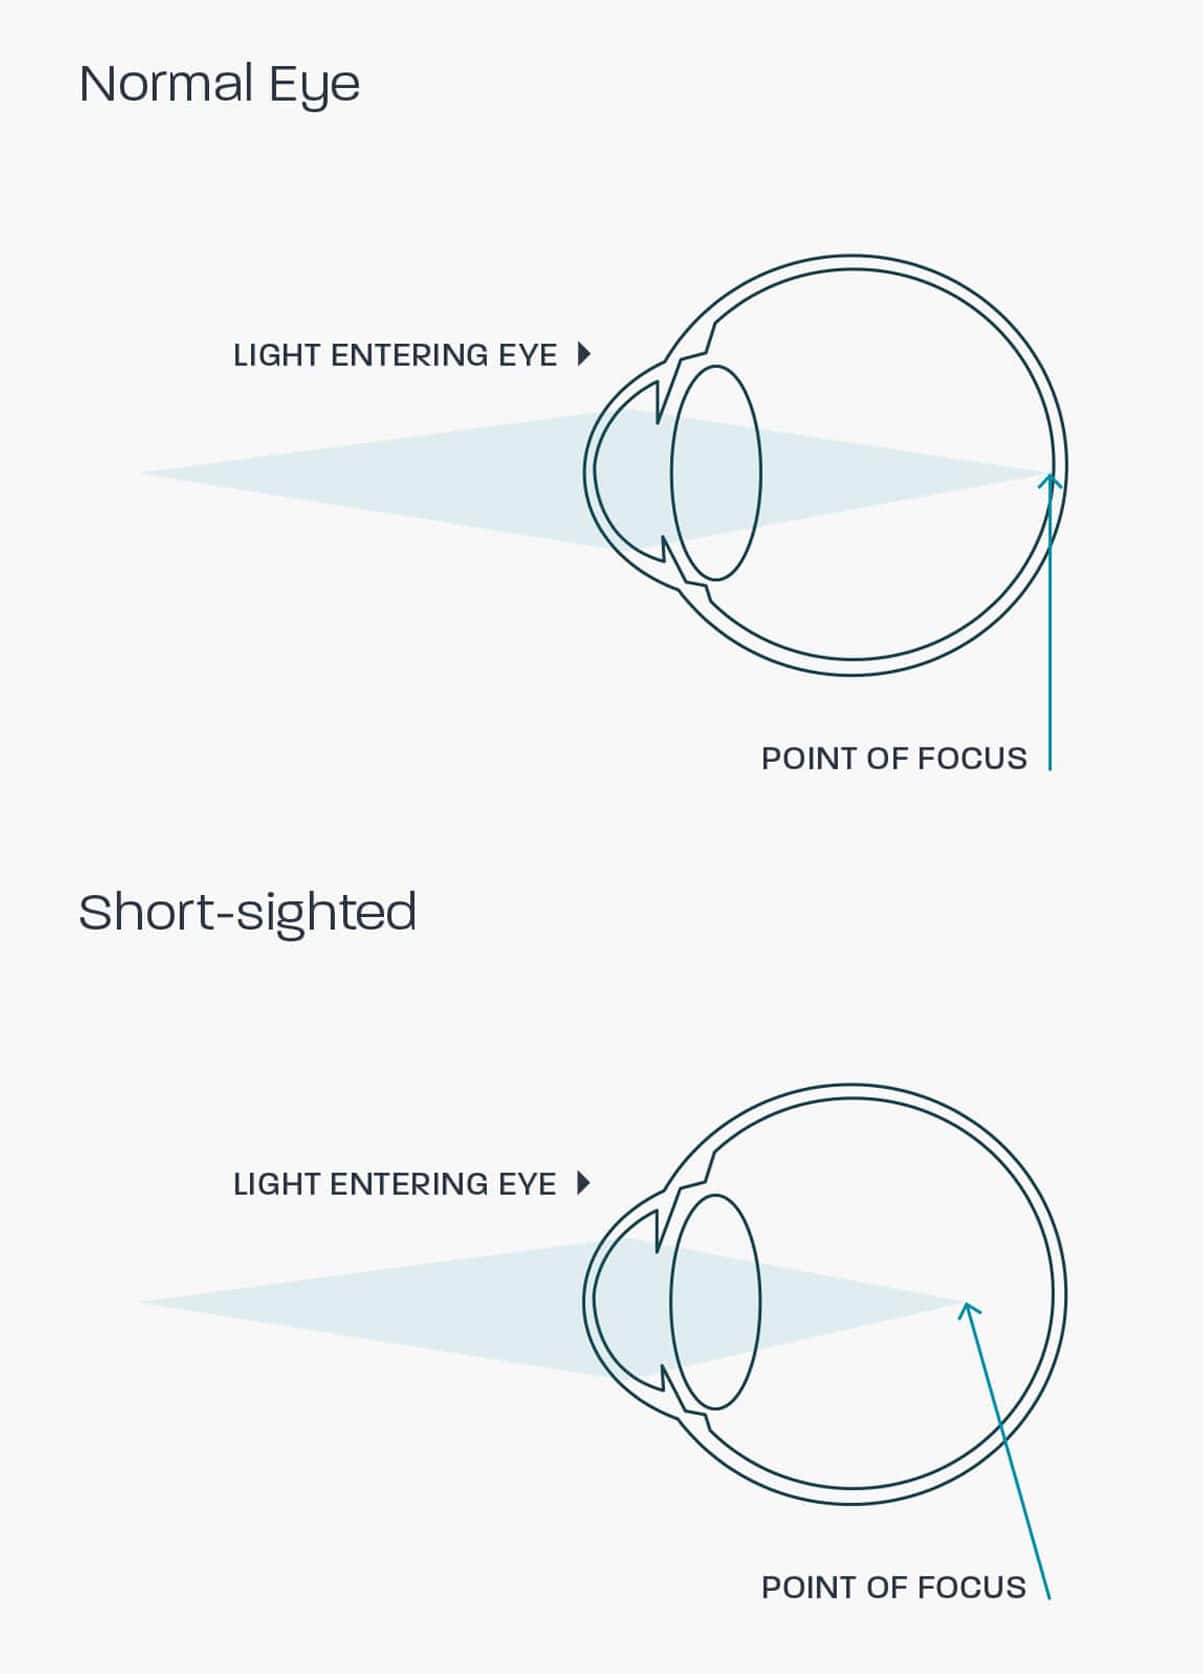 A graphic showing how a myopic eye works